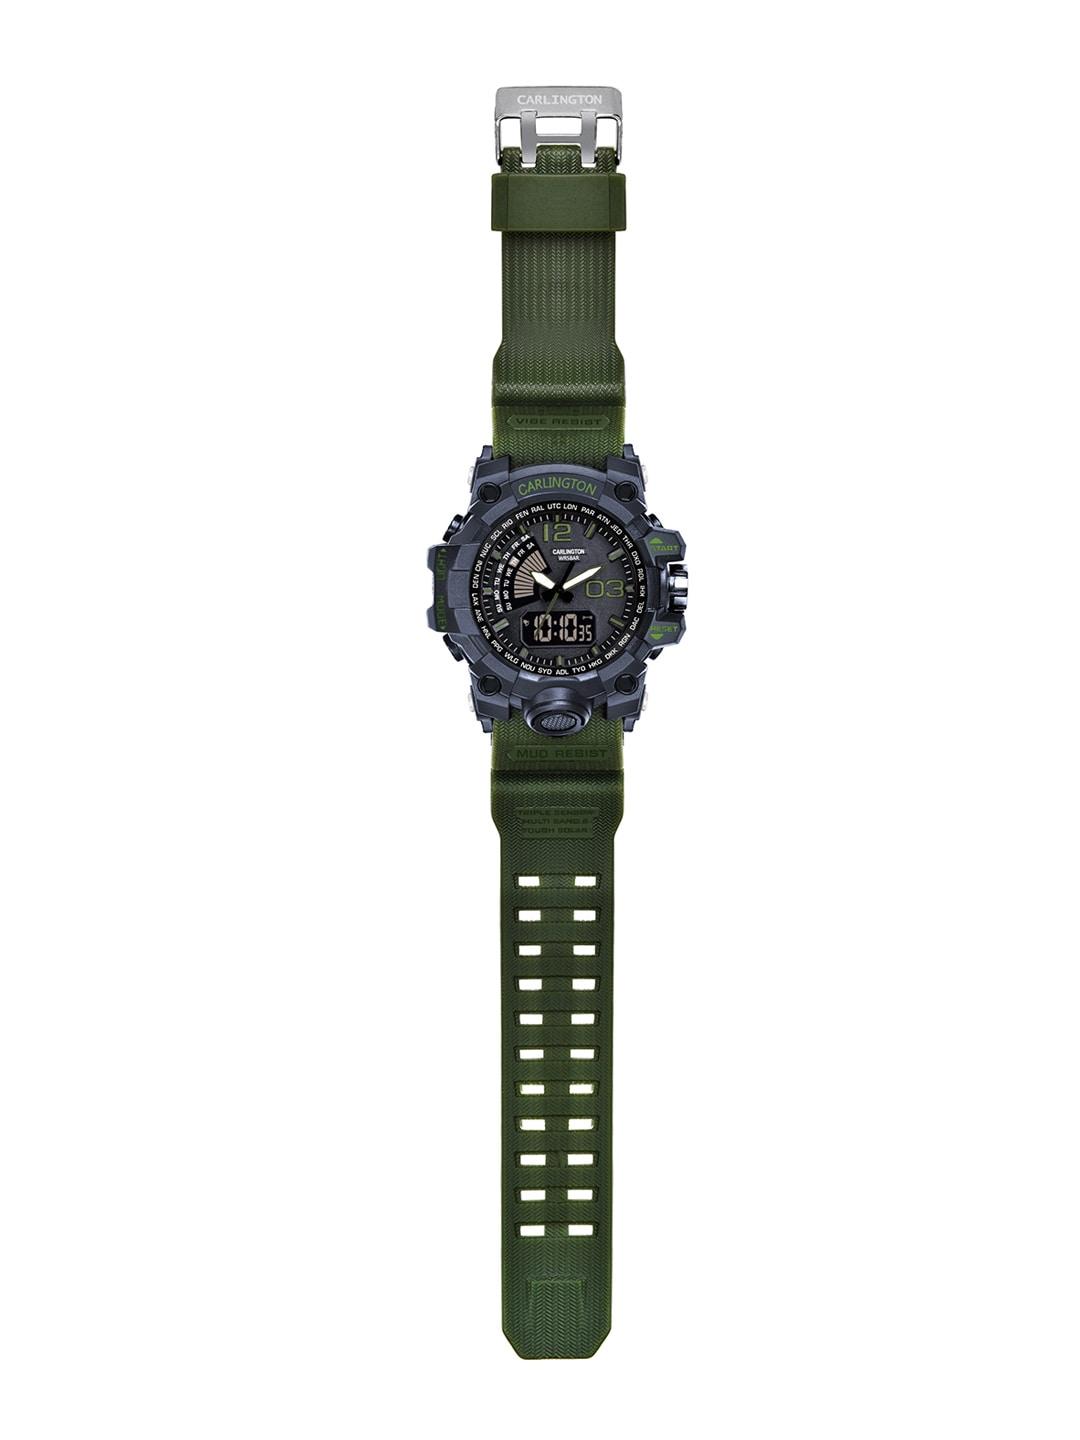 carlington-men-synthetic-straps-analogue-and-digital-watch--ct-3366-green